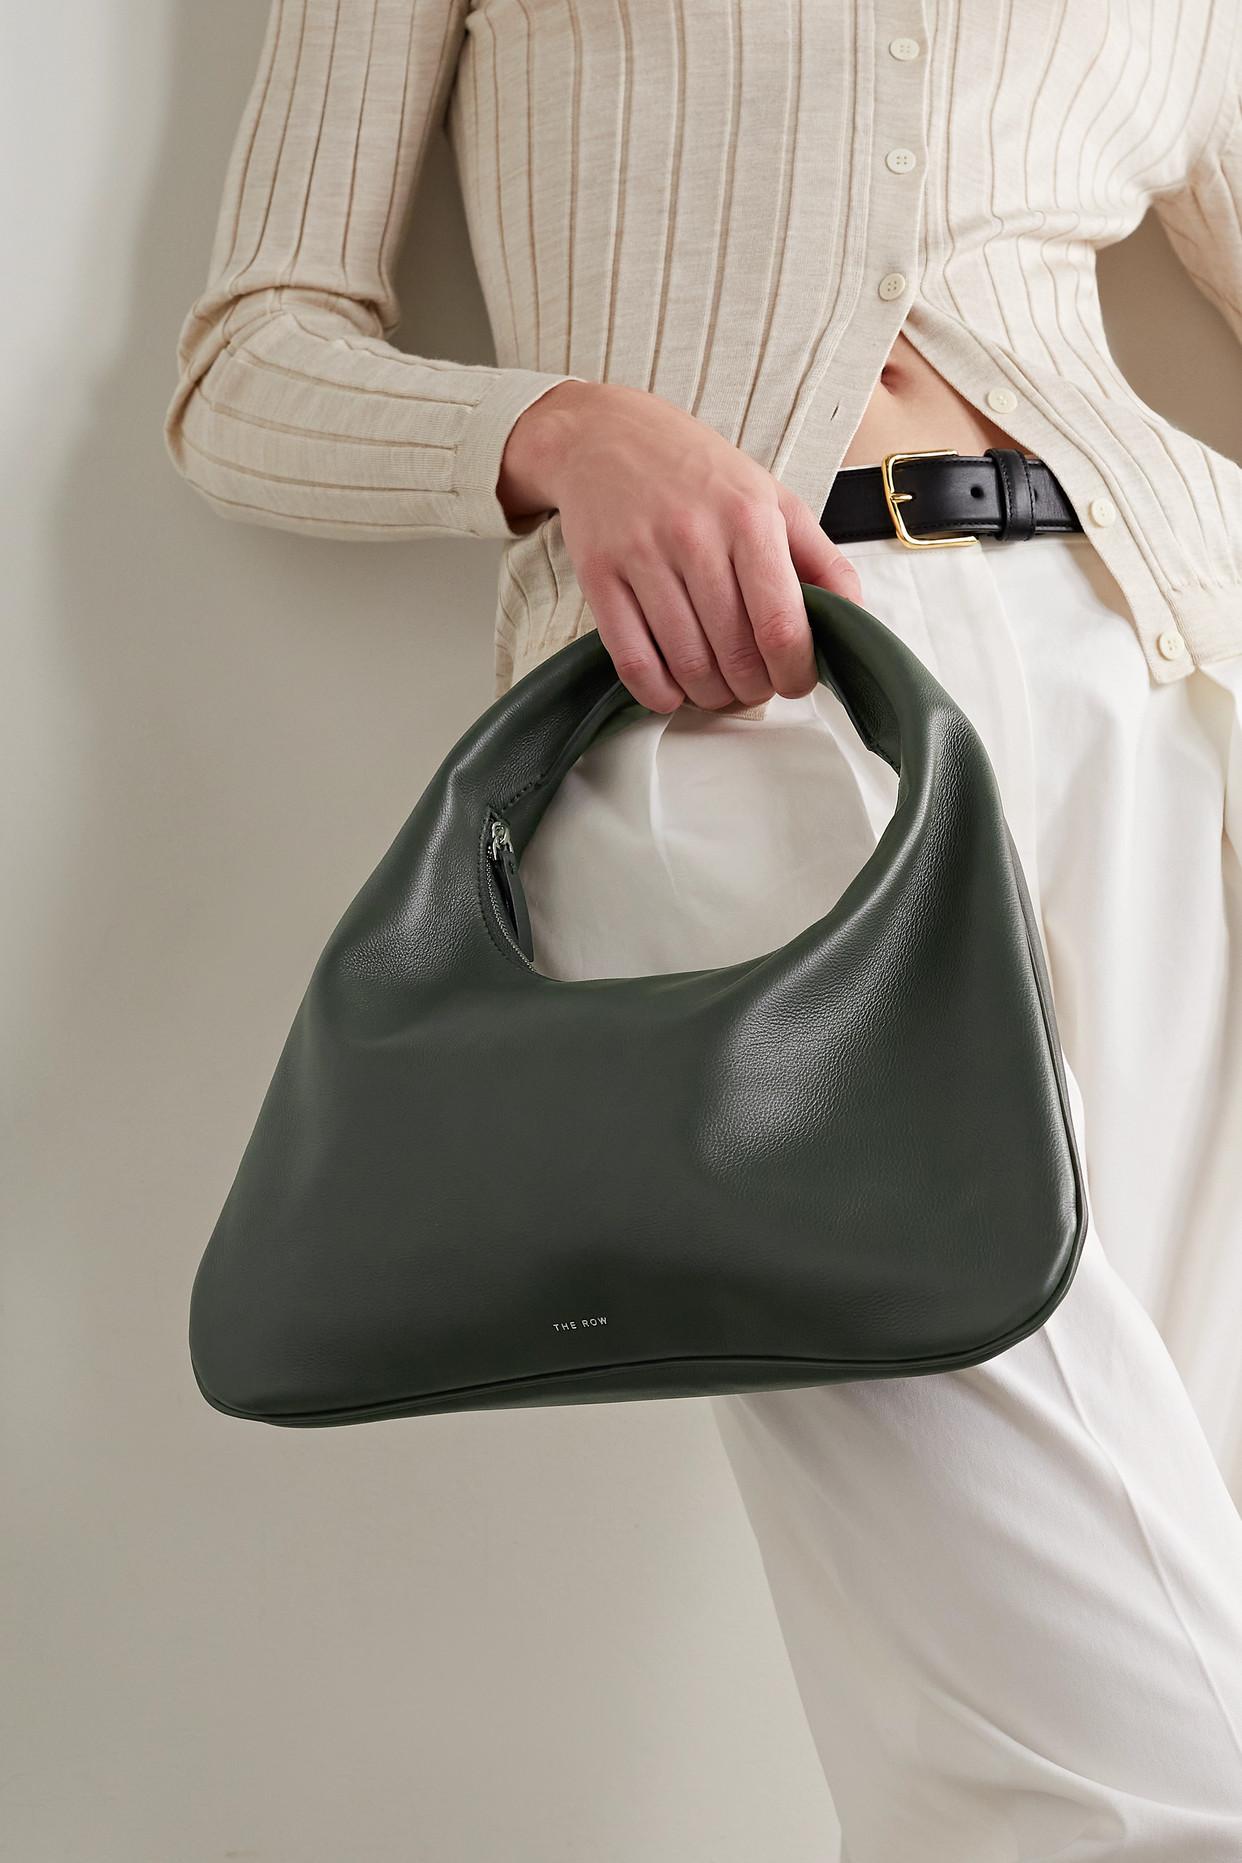 The Row Small Leather Everyday Shoulder Bag